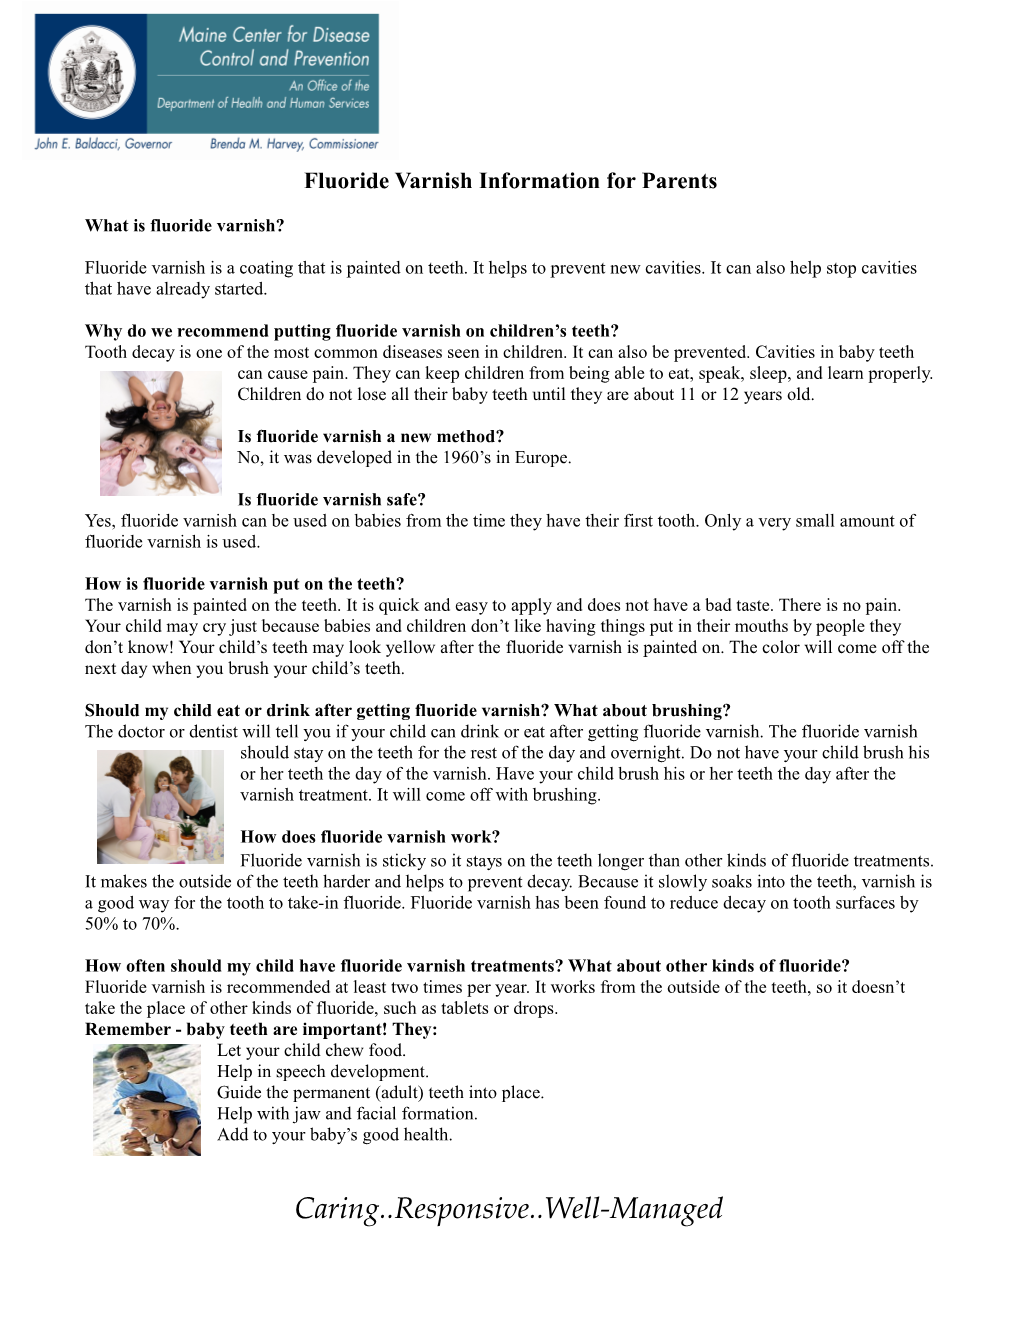 What Is Fluoride Varnish